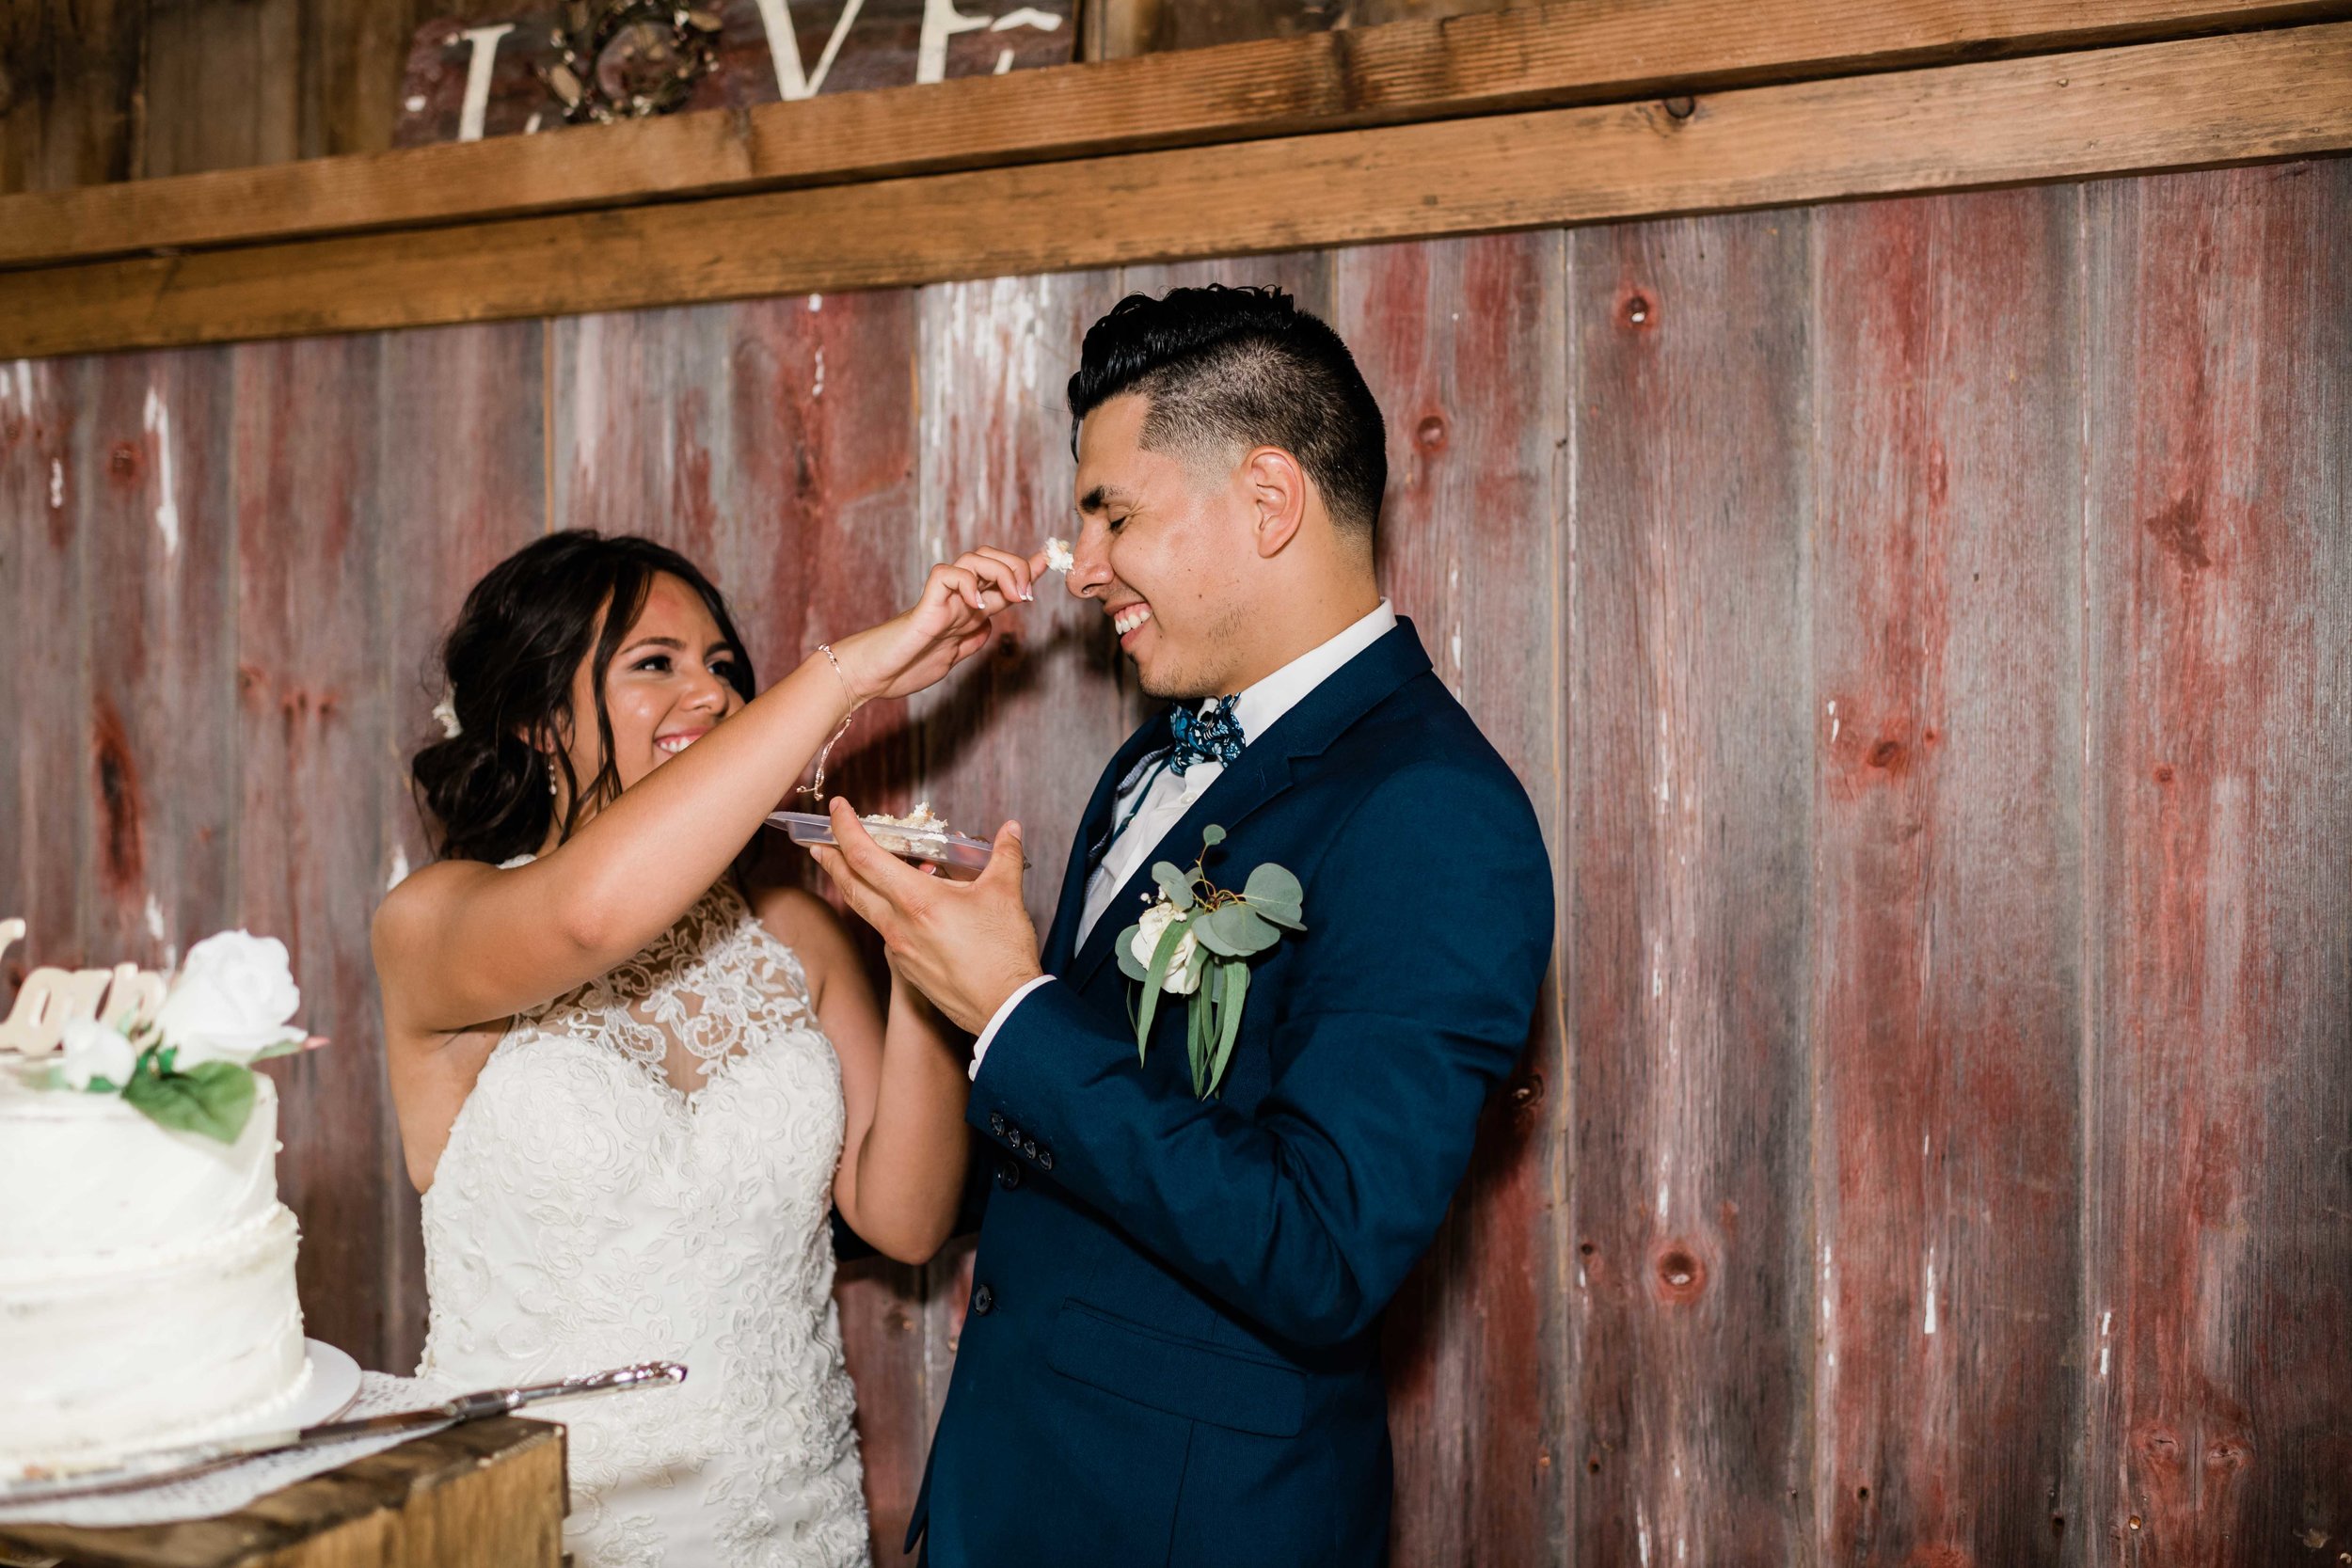 Bride putting cake on groom's nose